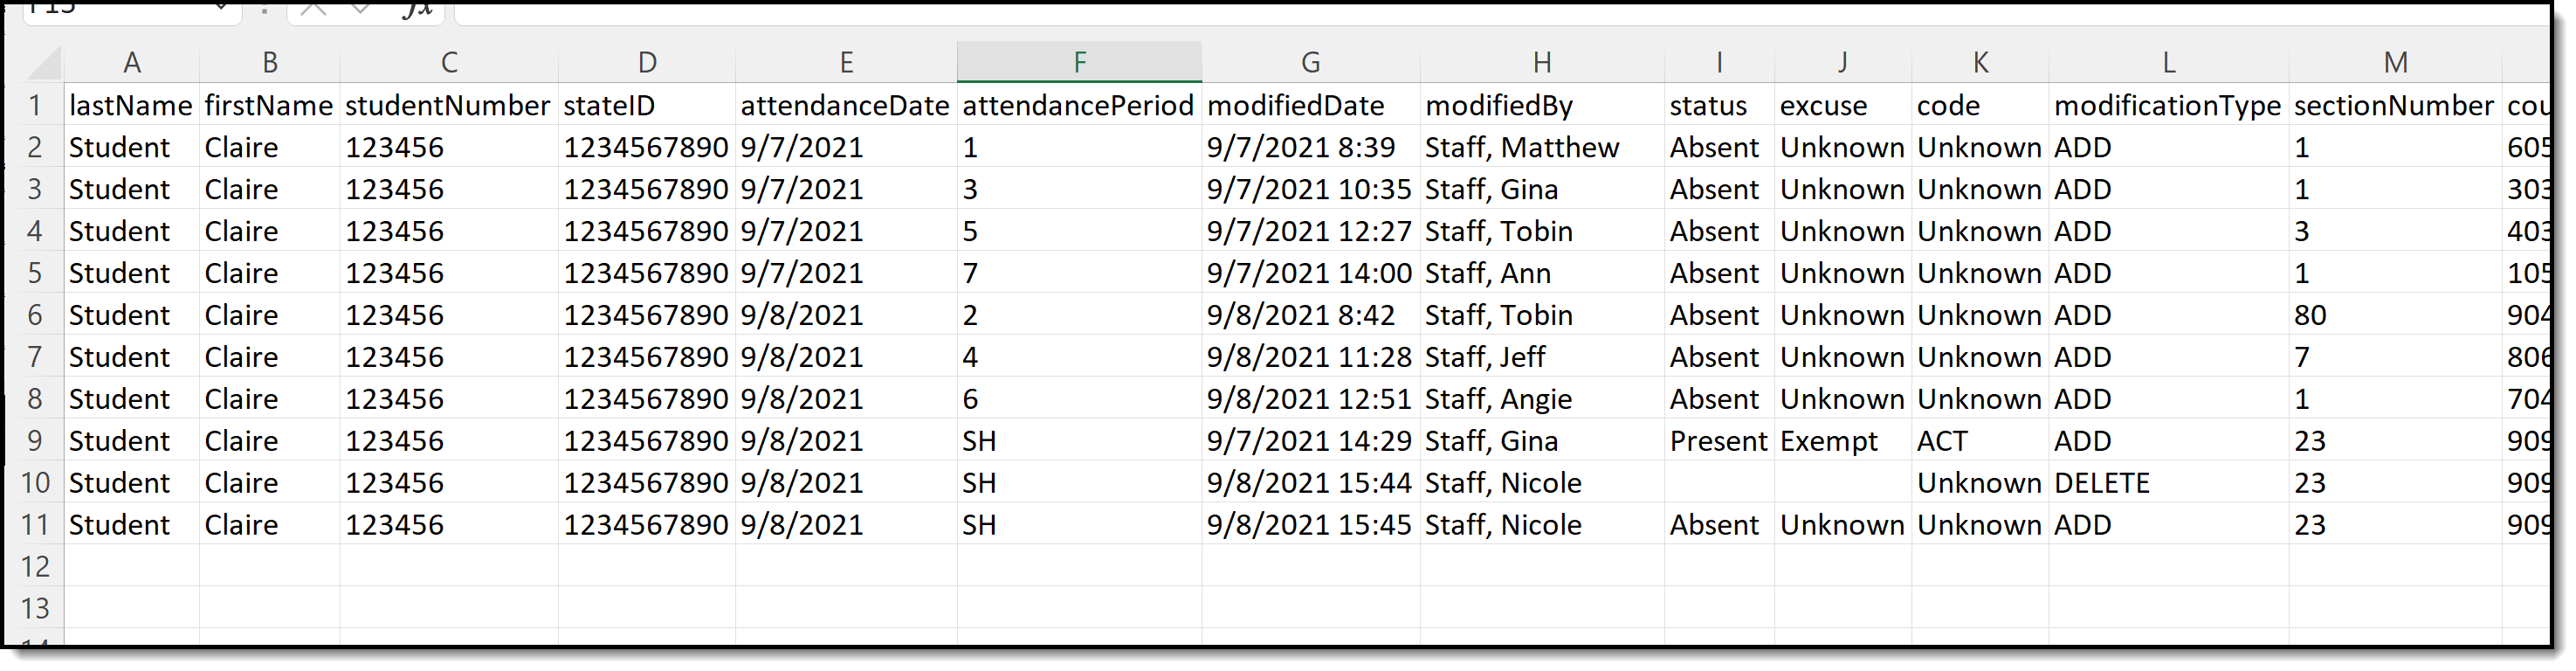 Screenshot of Attendance Change Tracking Report output in CSV.